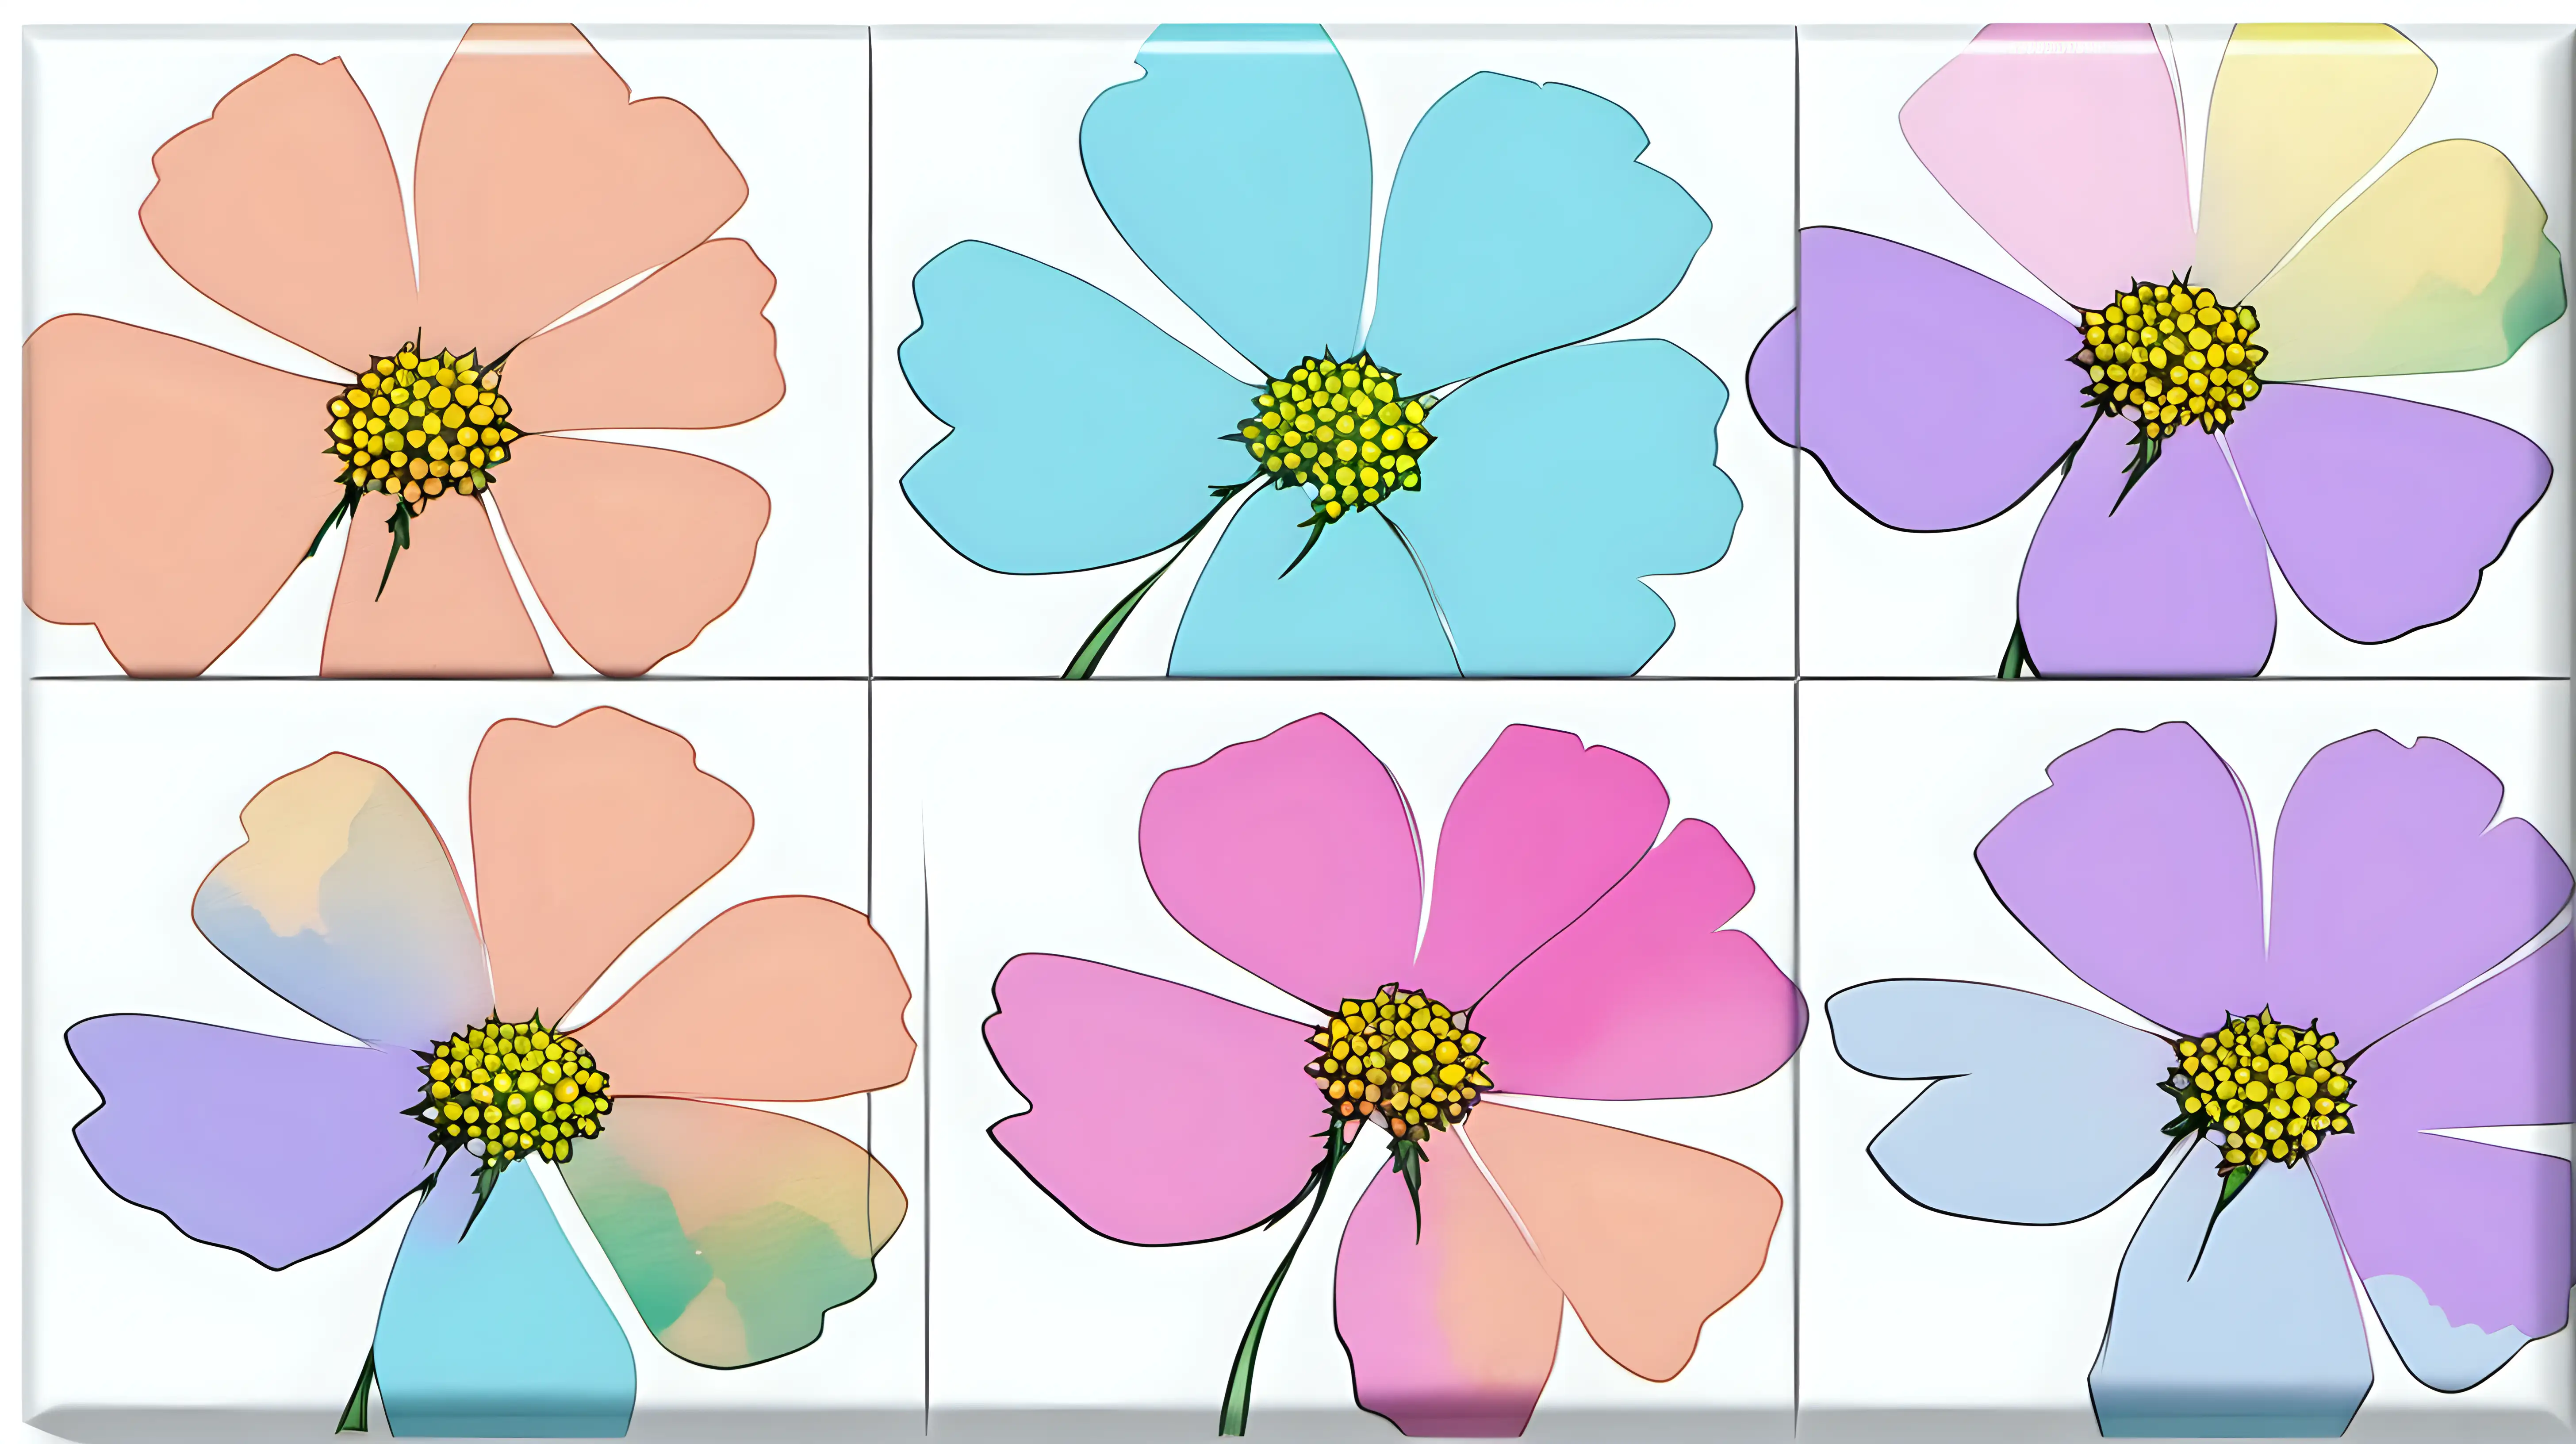 Pastel Watercolor Candytuft Flower Clipart on White Background Andy Warhol Inspired Tile